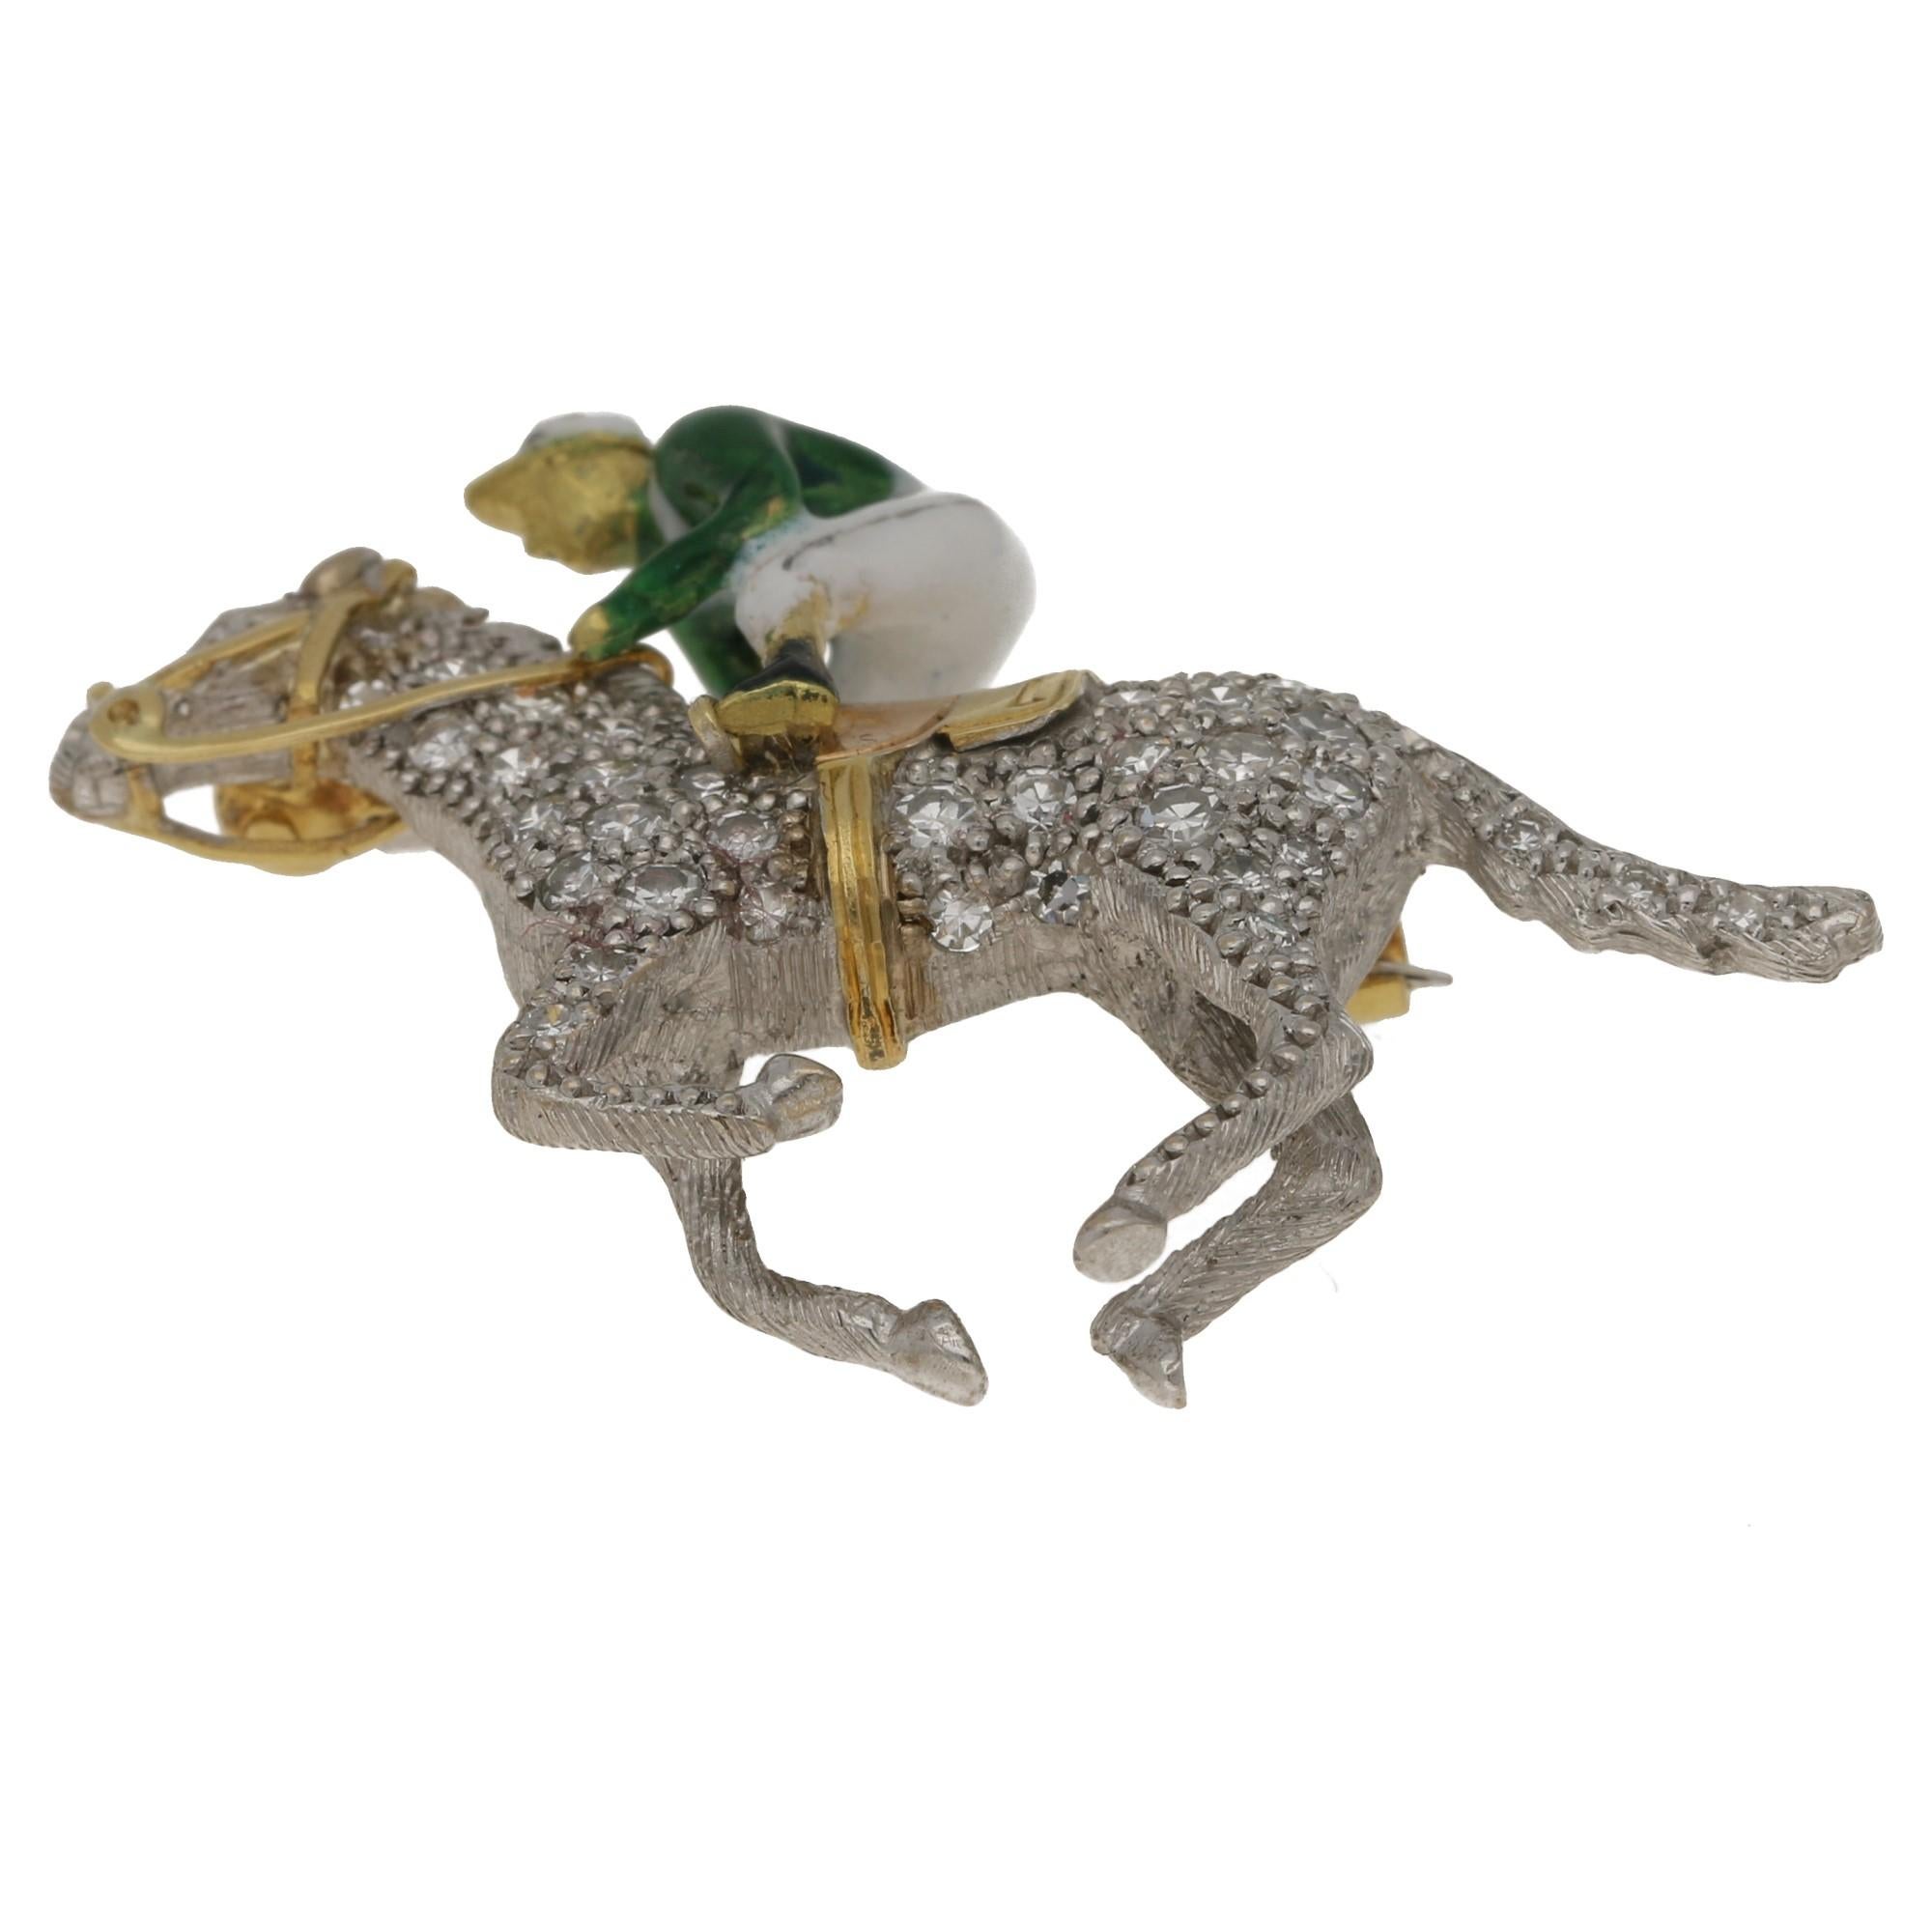 A Boodles enamel and diamond jockey brooch from 1969. Modelled as a polychrome enamel jockey riding a racehorse, pave-set throughout with 0.45 carats of single-cut diamonds, mounted in 18kt white and yellow gold, signed Boodles, maker's mark A&W for